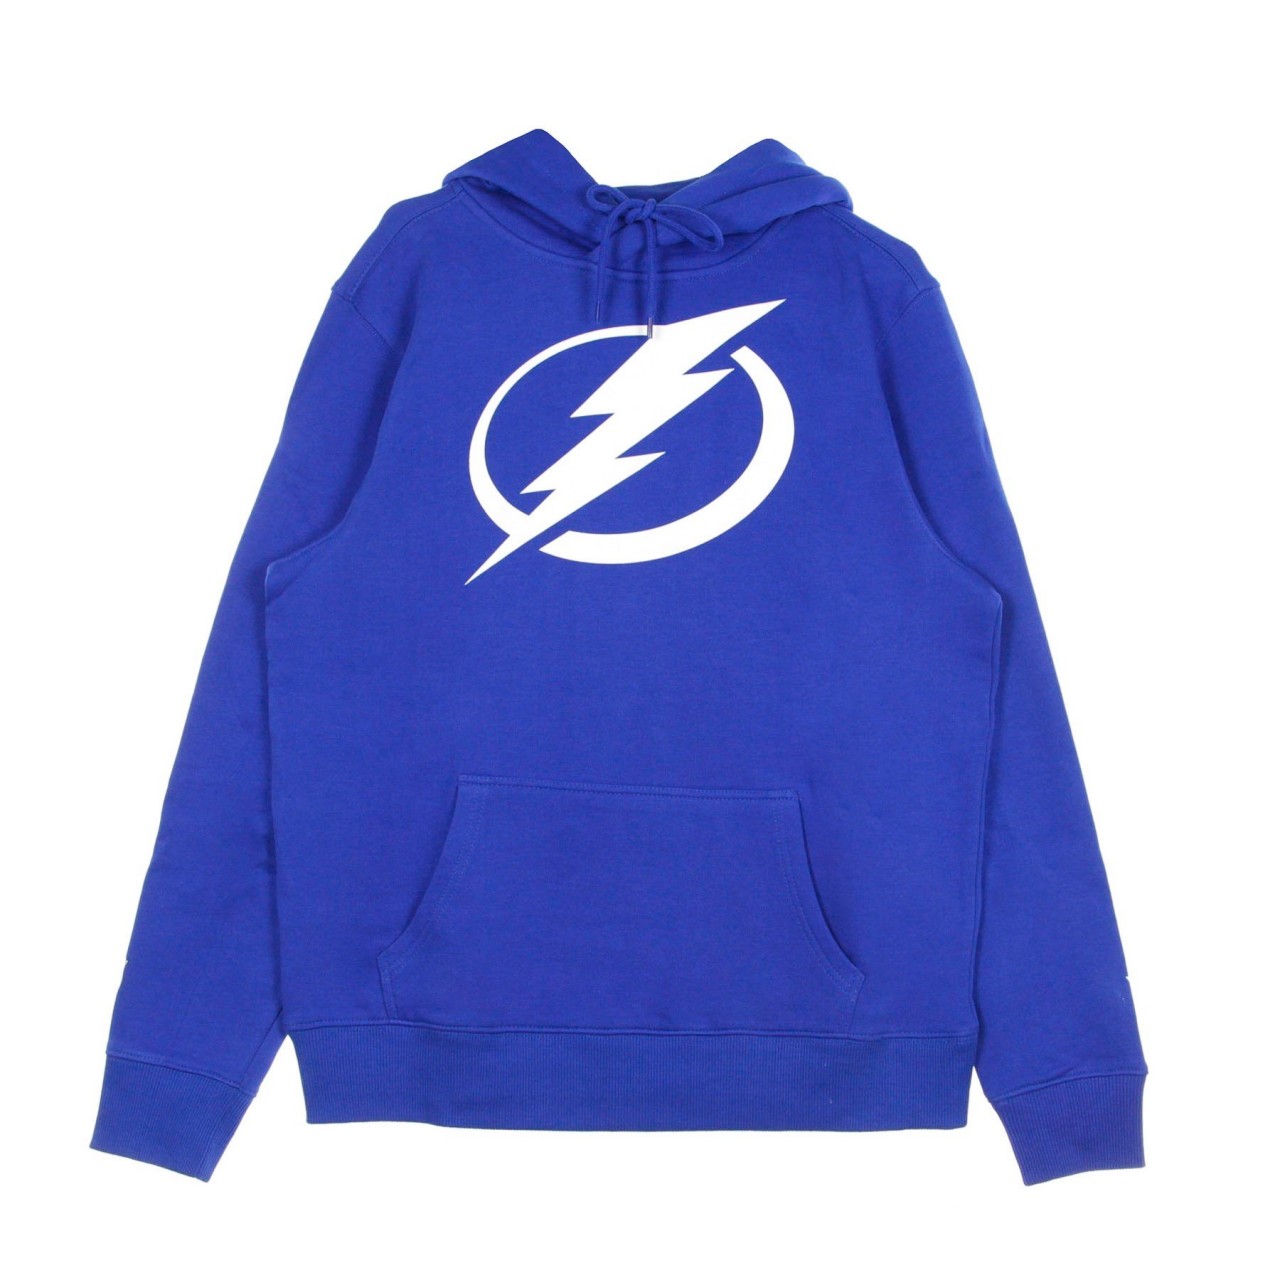 FANATICS BRANDED NHL ICONIC PRIMARY COLOUR LOGO GRAPHIC HOODIE TAMLIG 1979MRYL1ADTBL